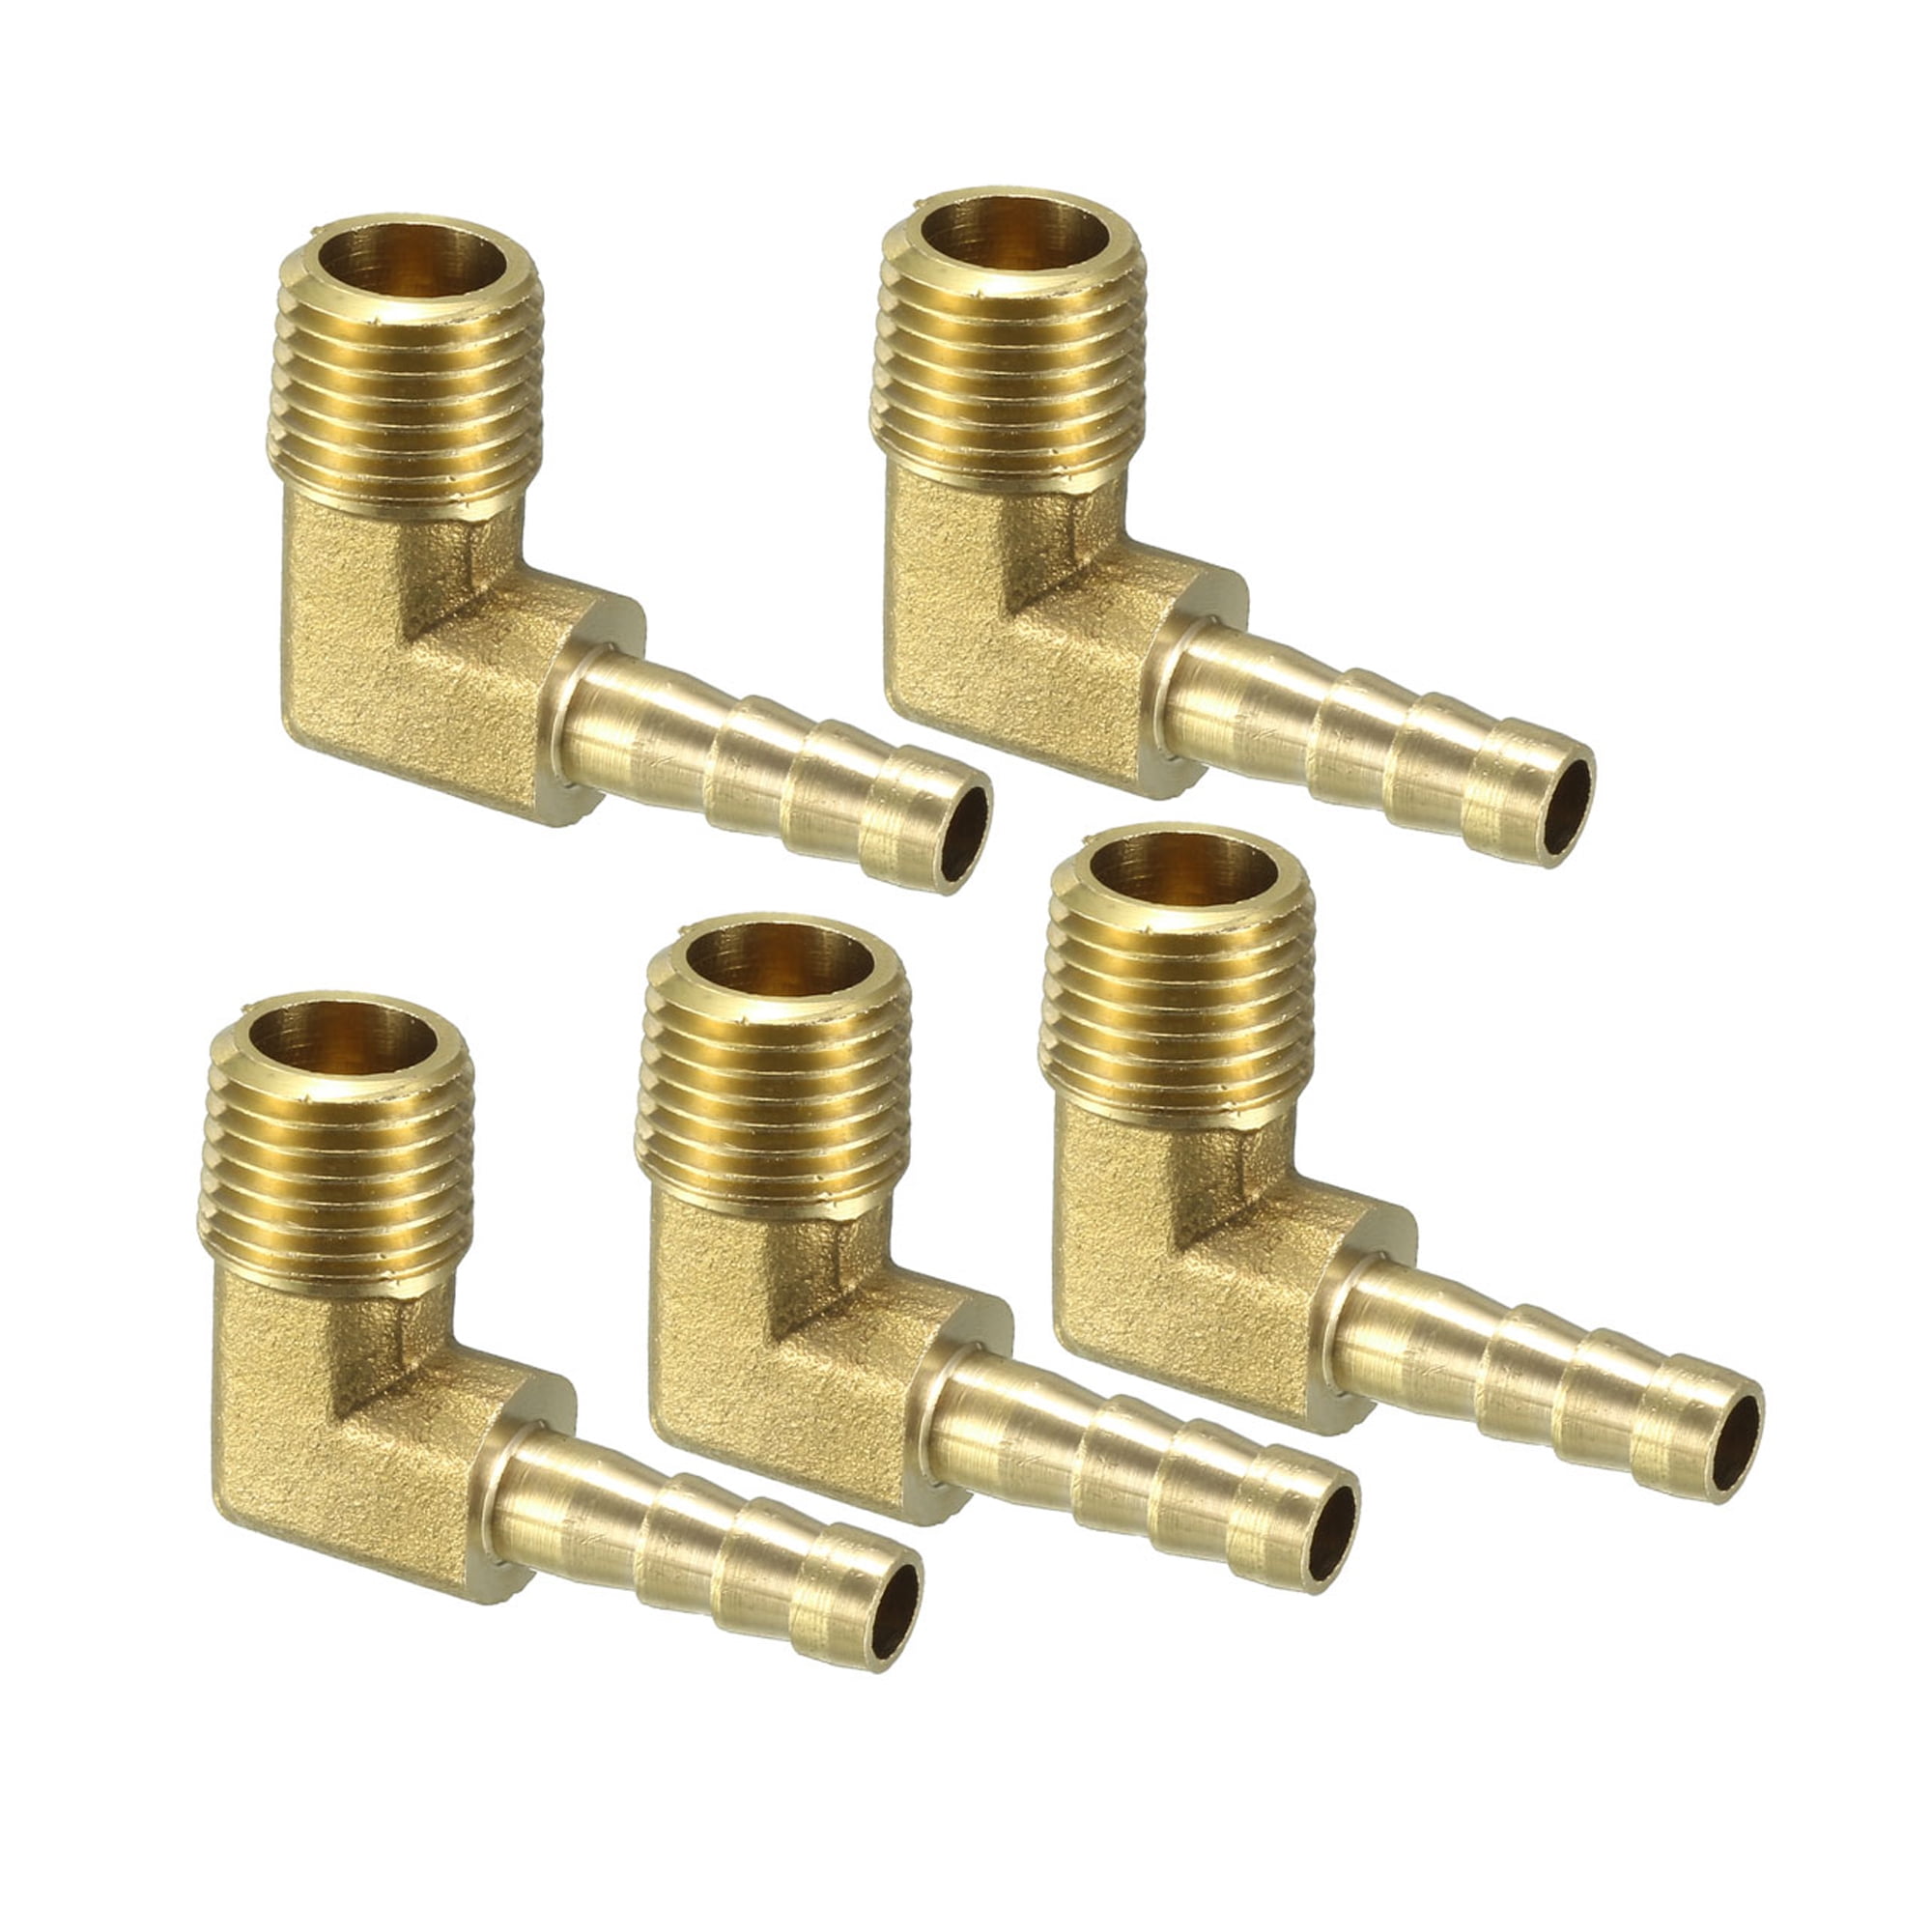 Supply store Brass Push-On Hose Fitting Connector 1/4 Hose Barb x 1/8 Female Pipe 10pcs Quality Metal Fast 